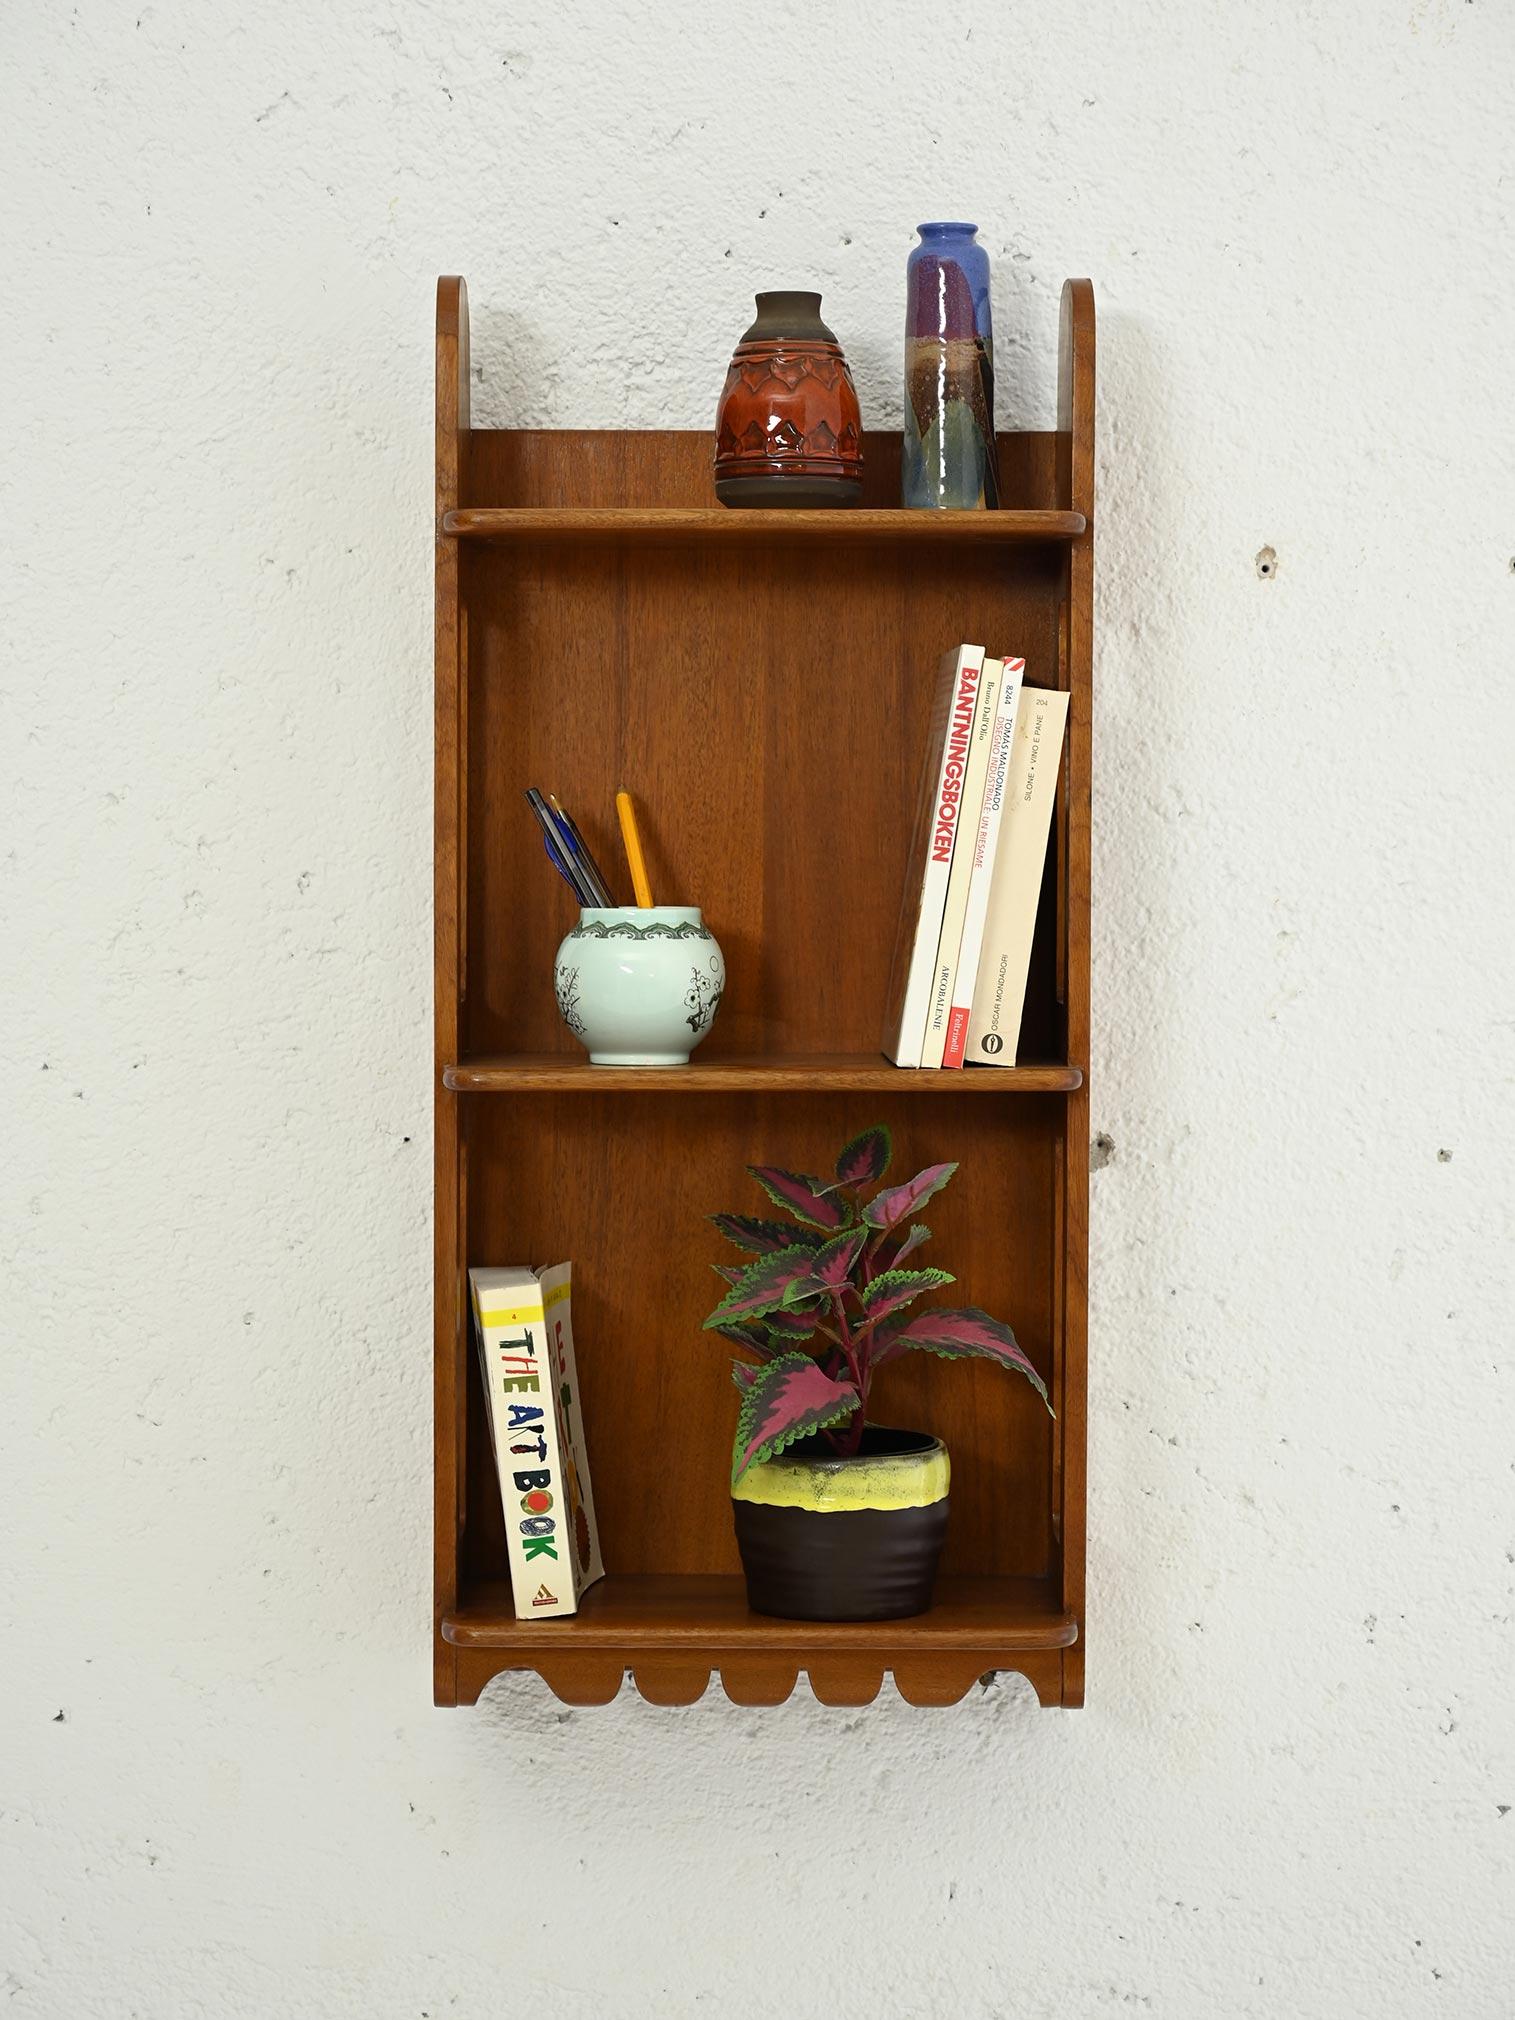 Rare hanging bookcase designed by Josef Frank in the 1950s in mahogany wood.

Produced by Svenskt Tenn in Sweden in the 1950s.

Good conditions. A conservative restoration was done with products of natural origin. Può presentare dei segni del tempo.